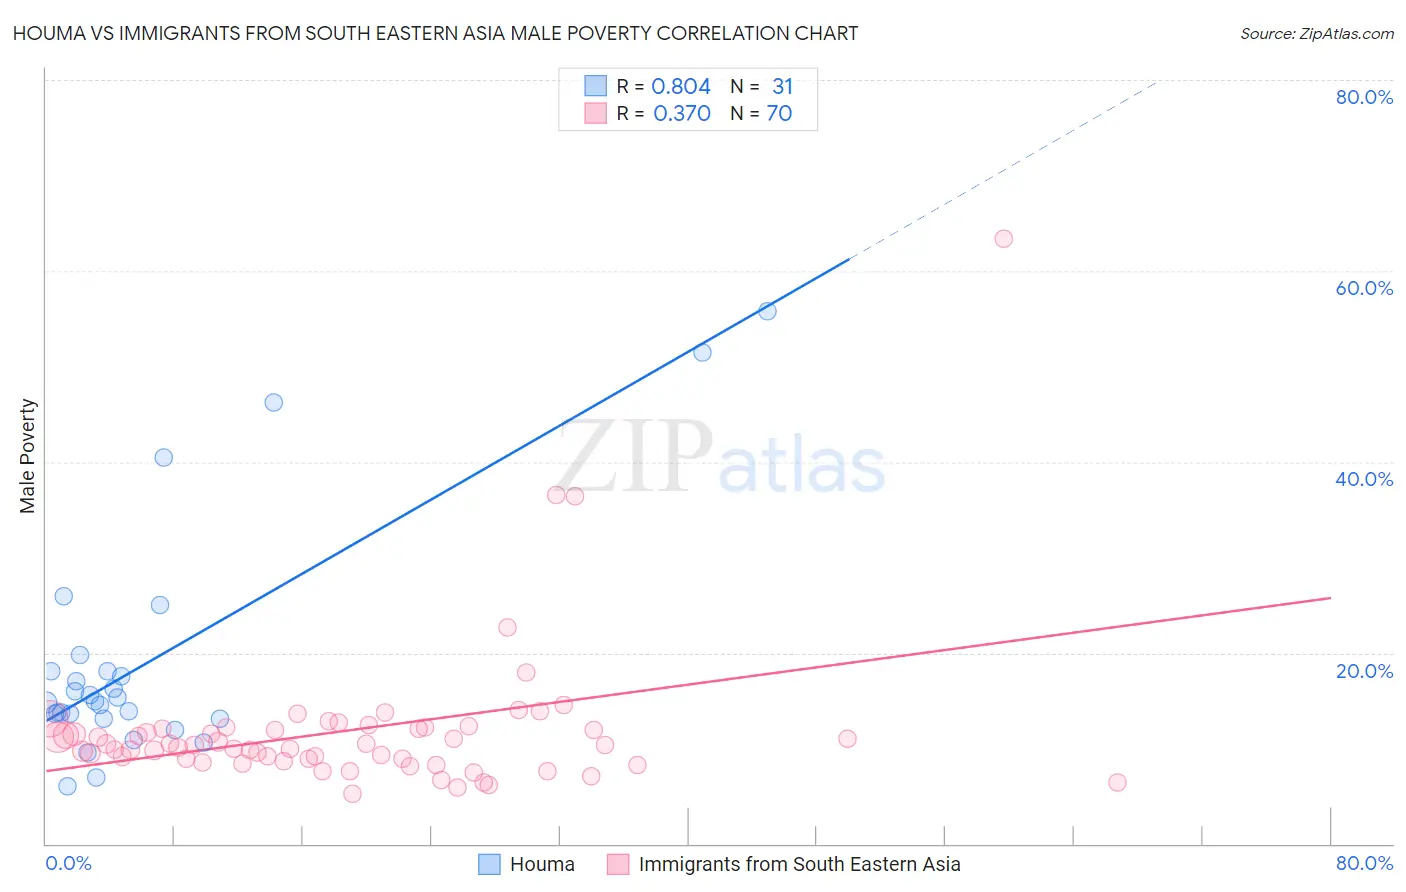 Houma vs Immigrants from South Eastern Asia Male Poverty